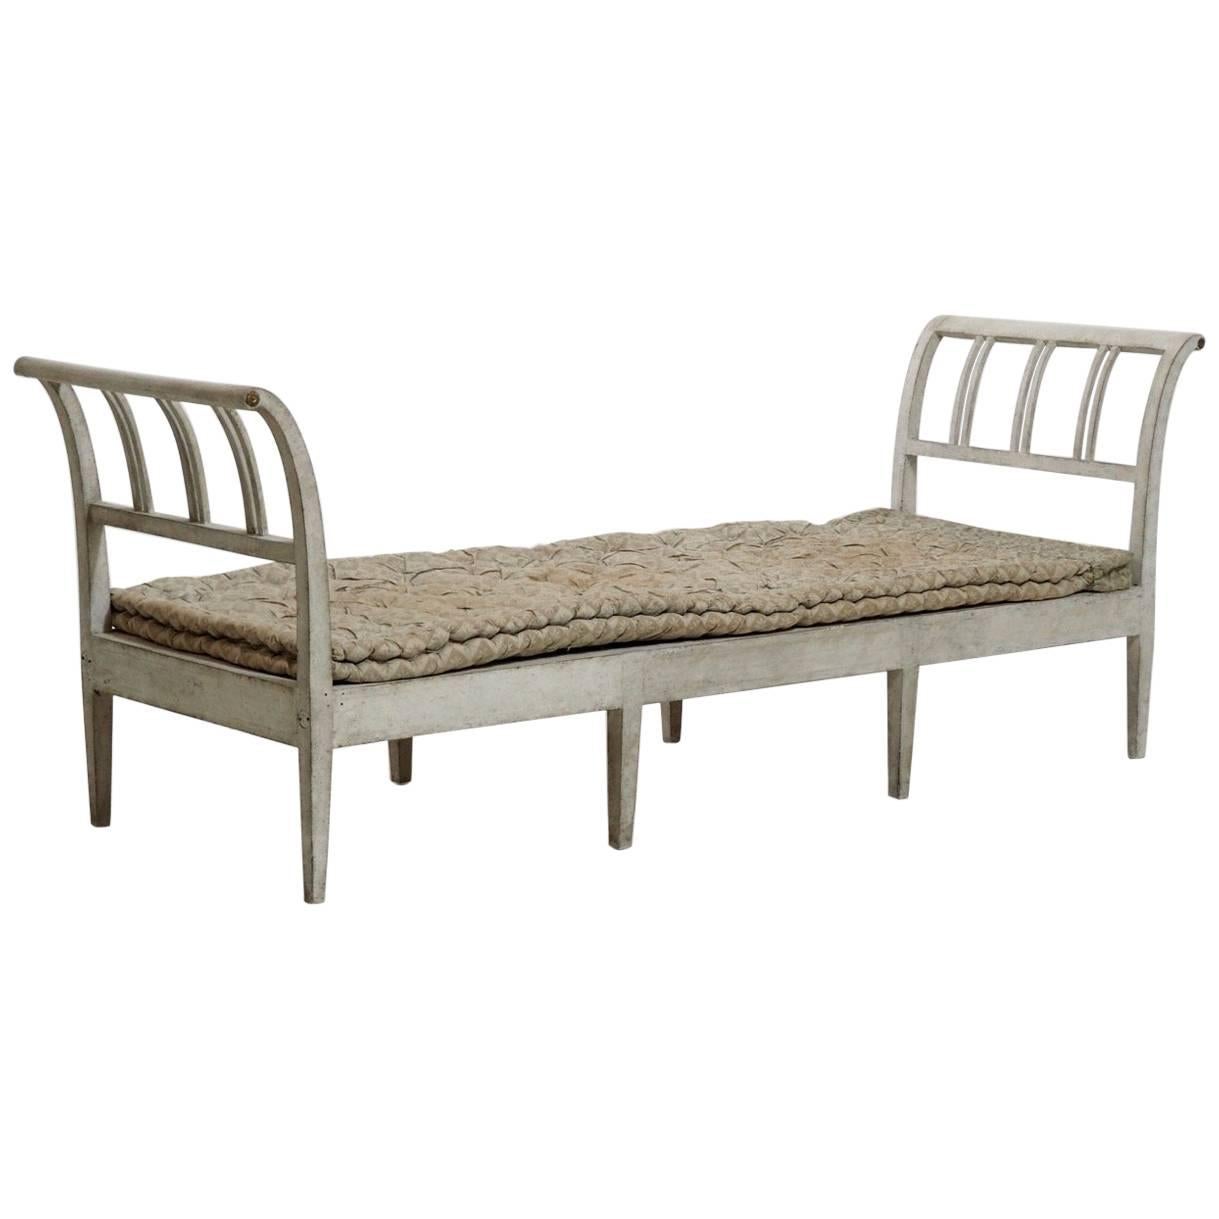 Danish Daybed or Bench with Cushion, circa 1810